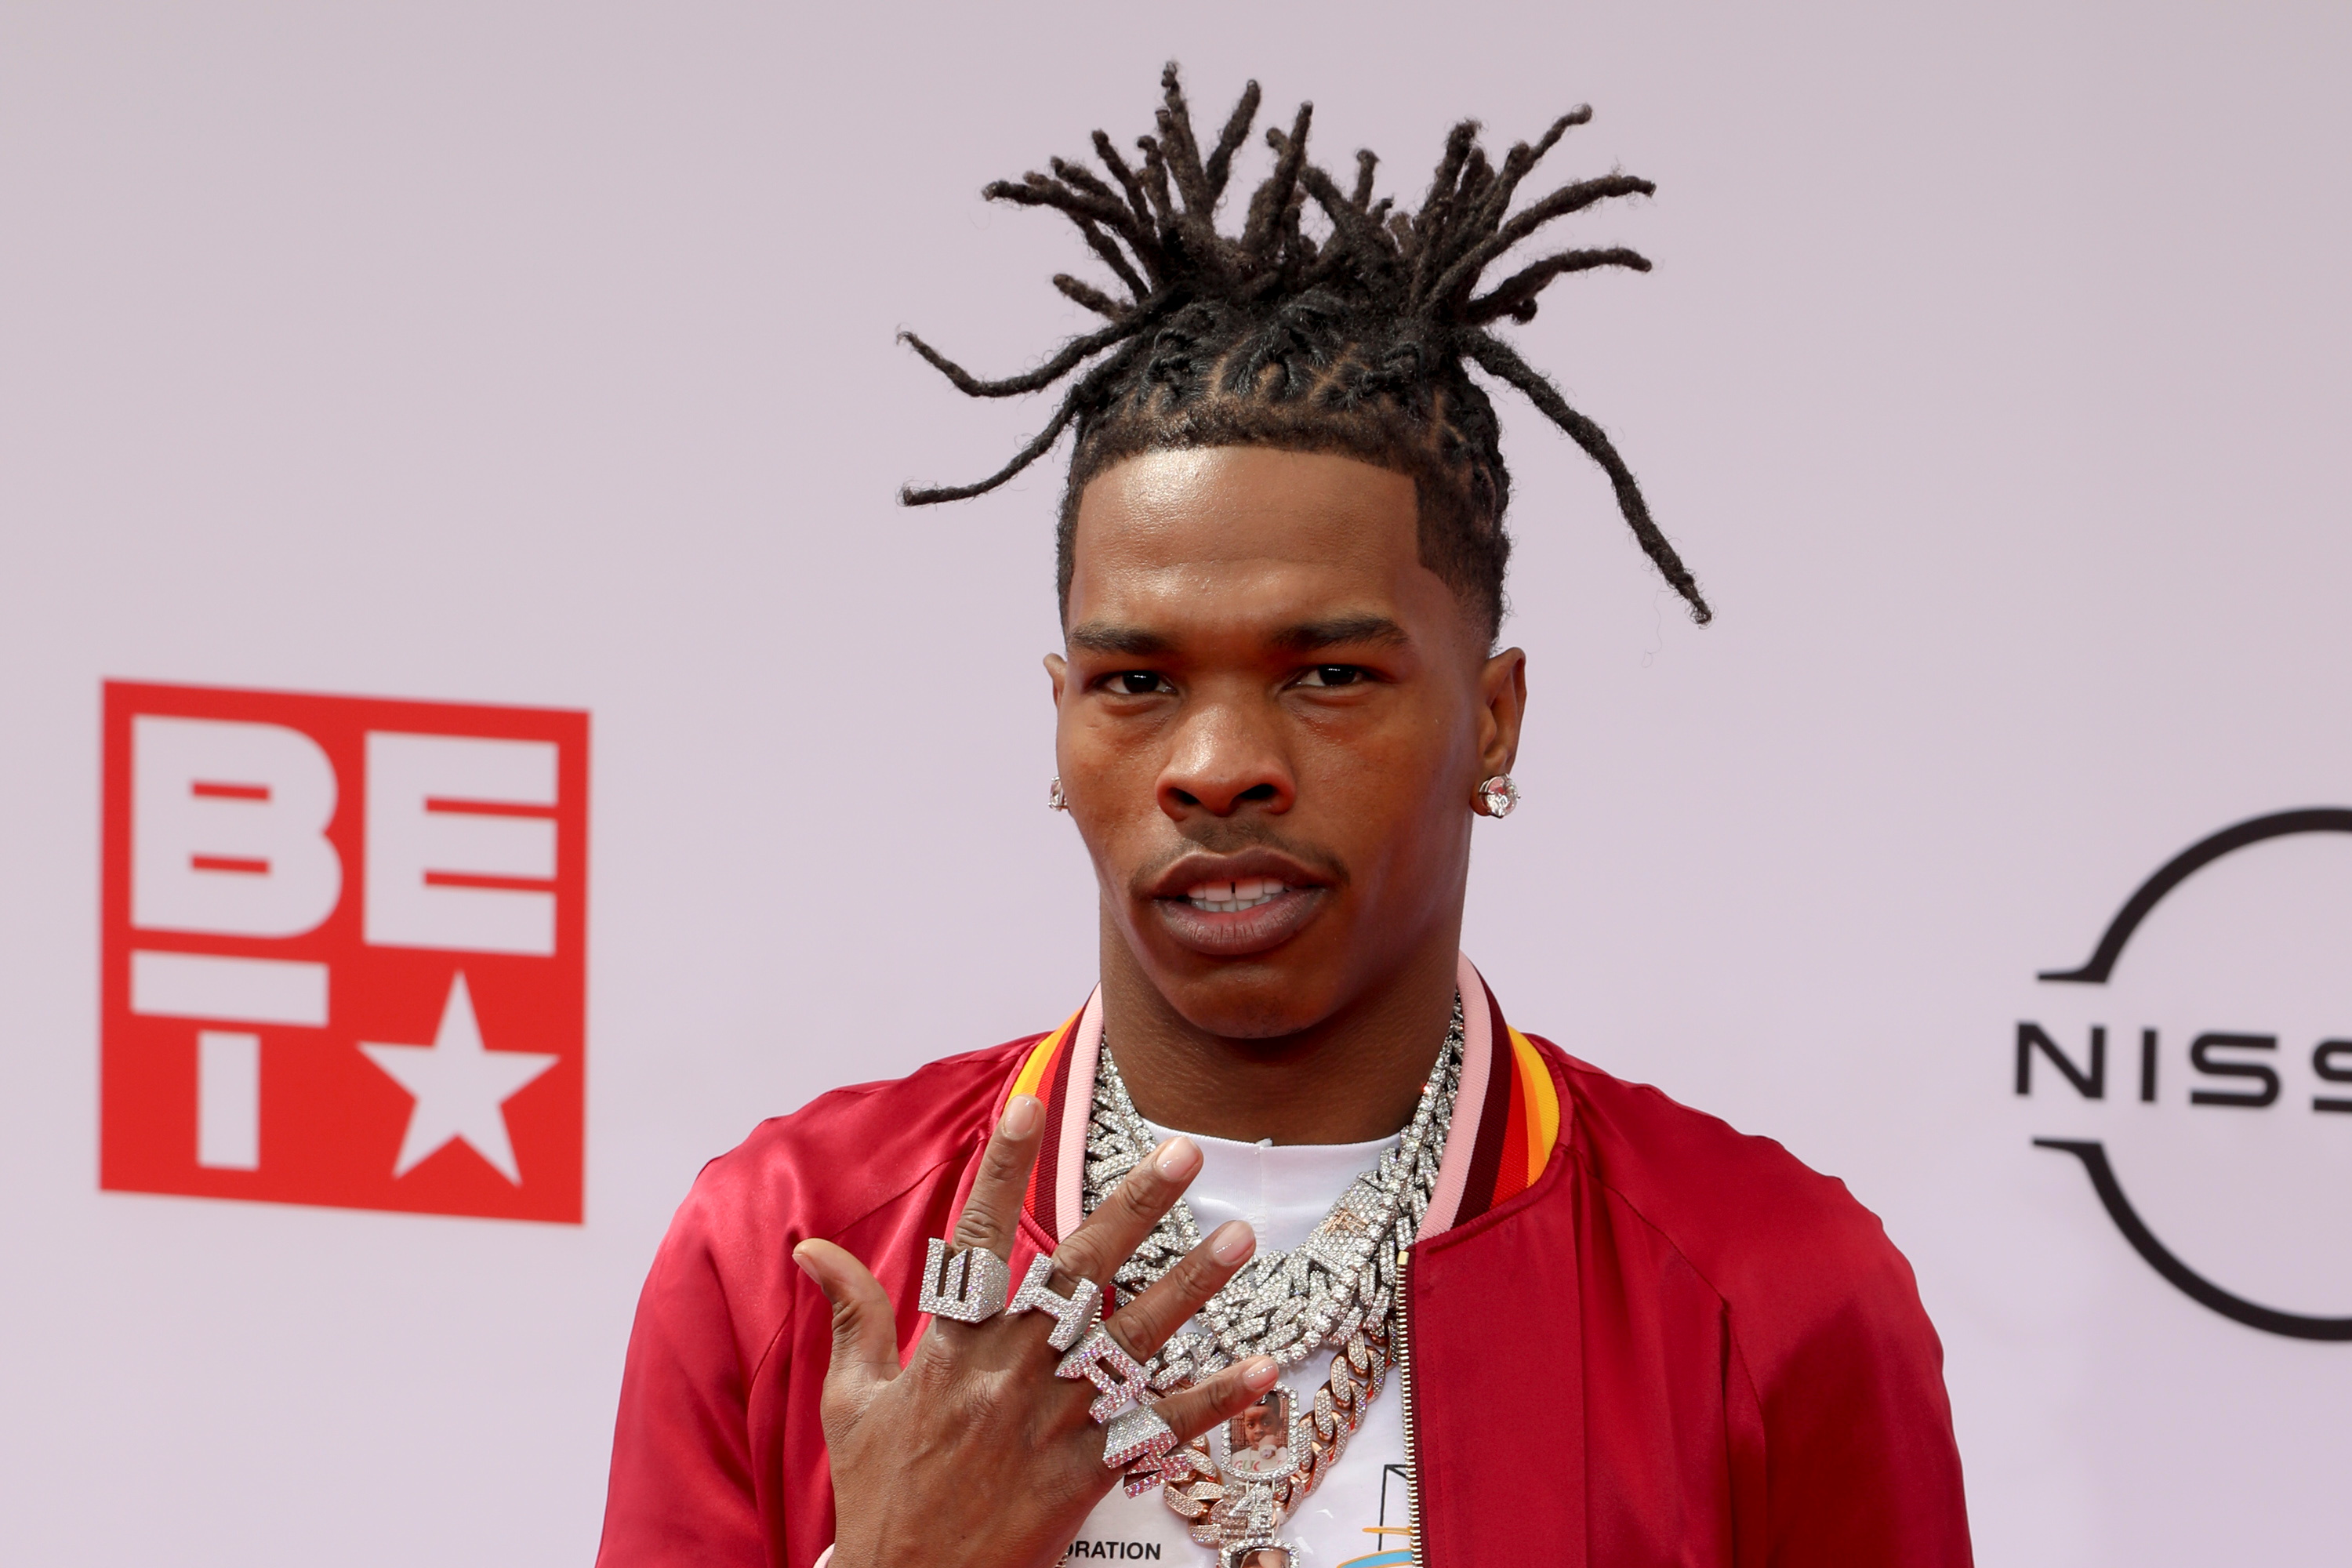 U.S. rapper Lil Baby arrested in Paris for carrying cannabis - source | Reuters